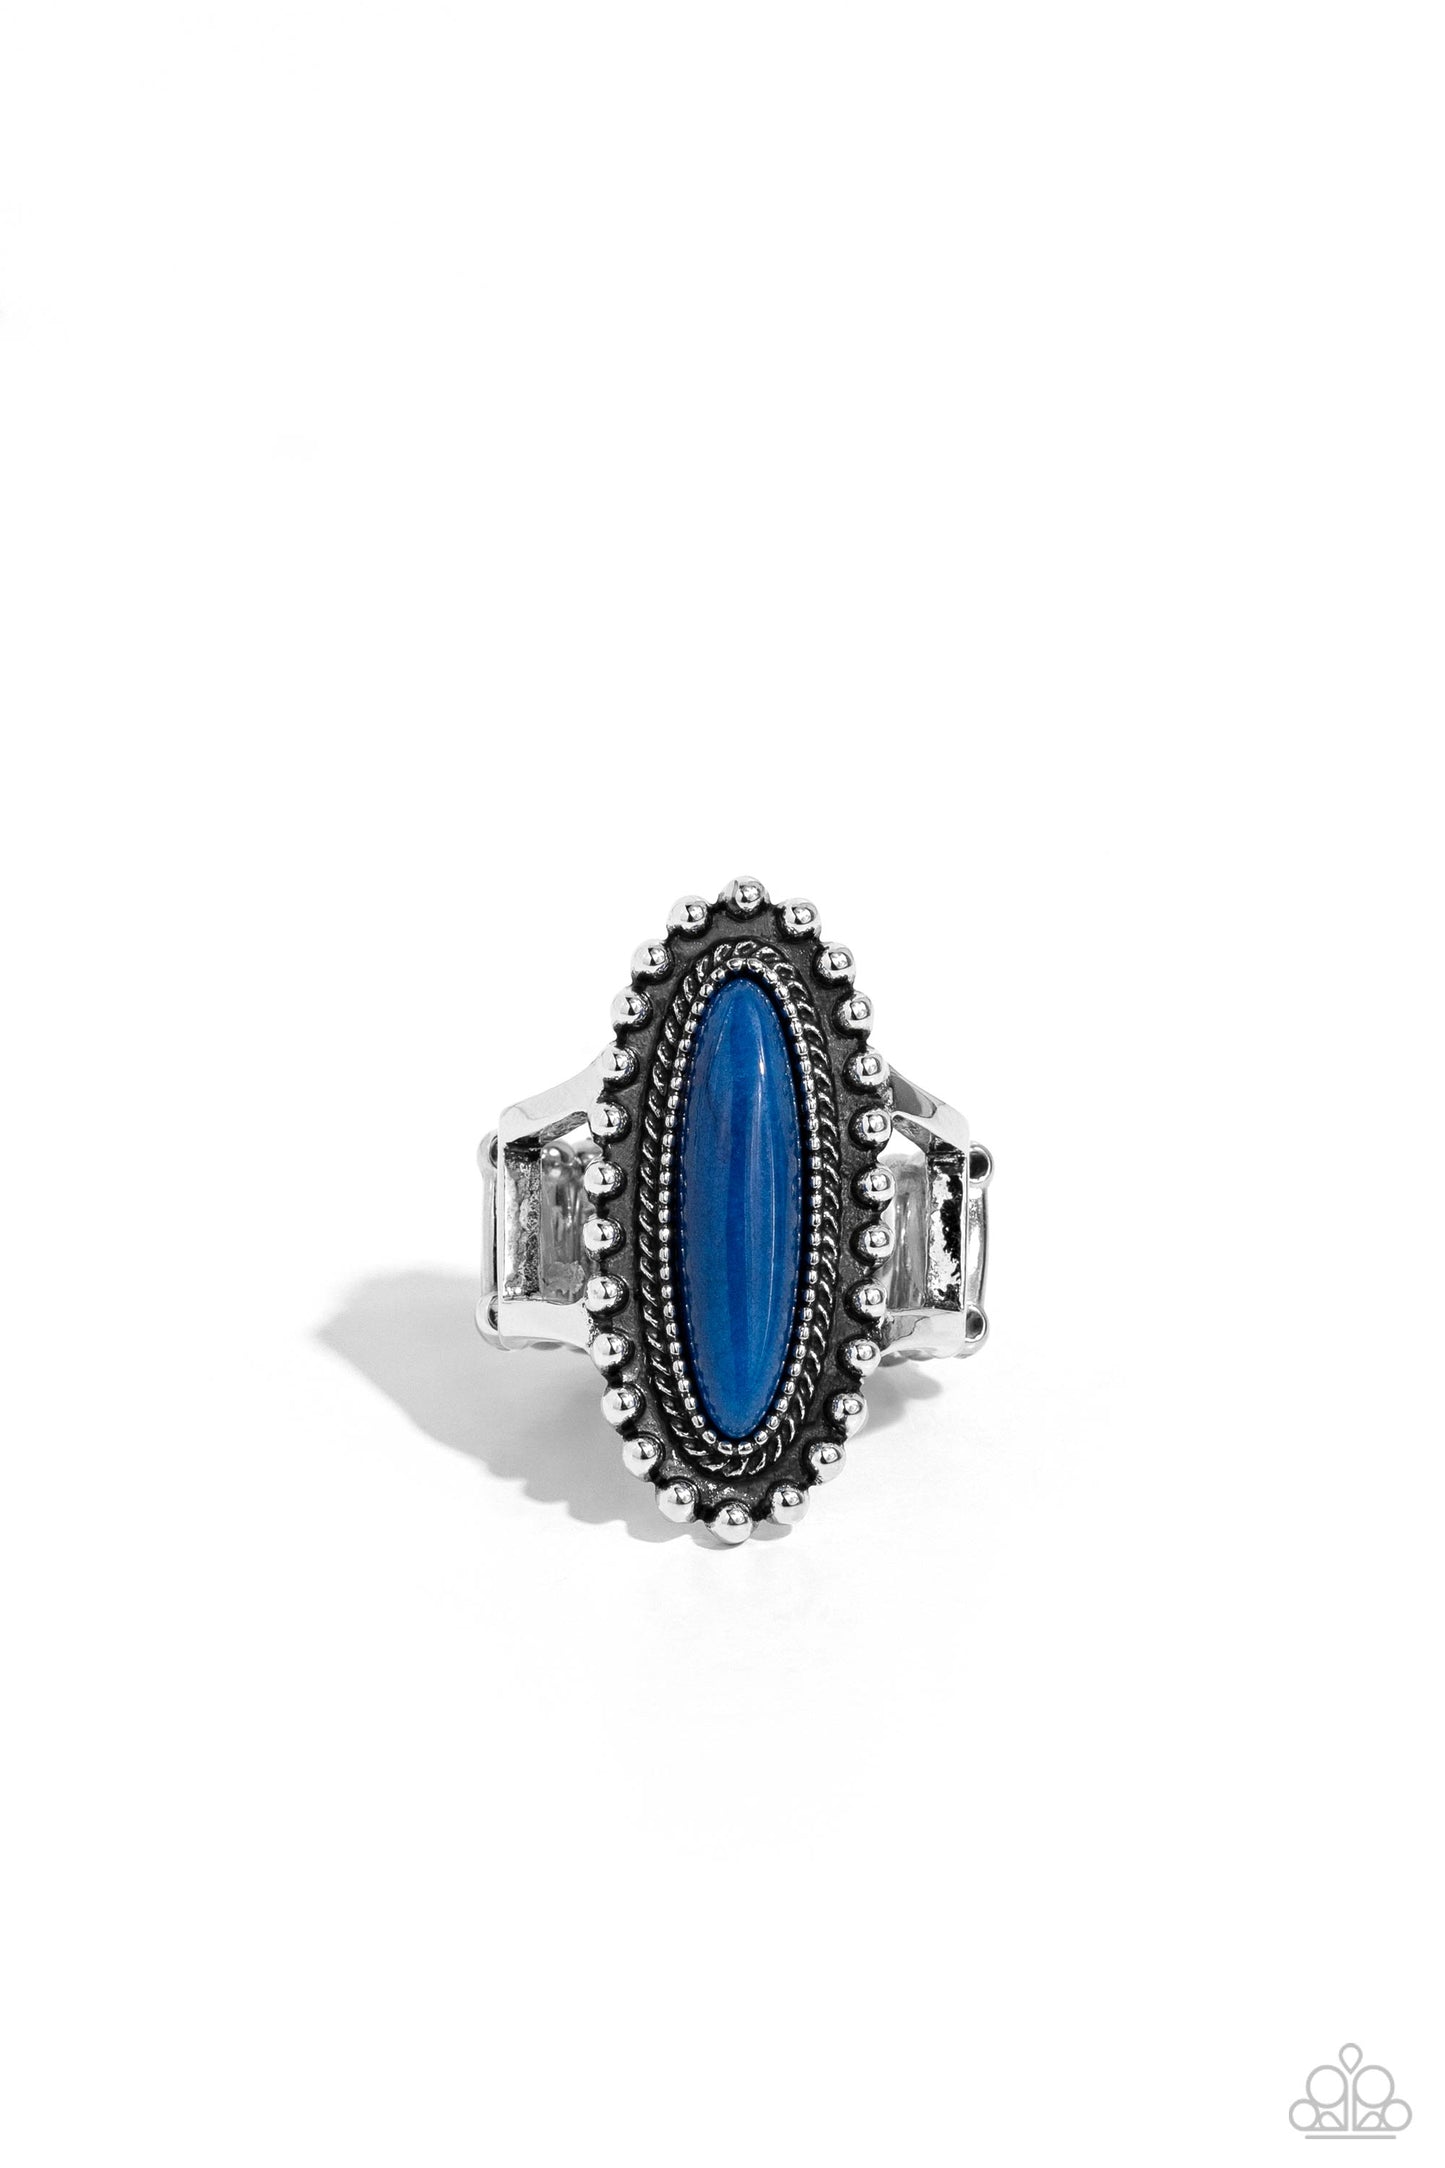 Oblong Occasion - Blue and Silver Ring - Paparazzi Accessories - An oblong lapis stone is pressed into the center of a studded silver band swirling with textured patterns atop airy silver bands for a seasonal finish. Features a stretchy band for a flexible fit. Sold as one individual ring.